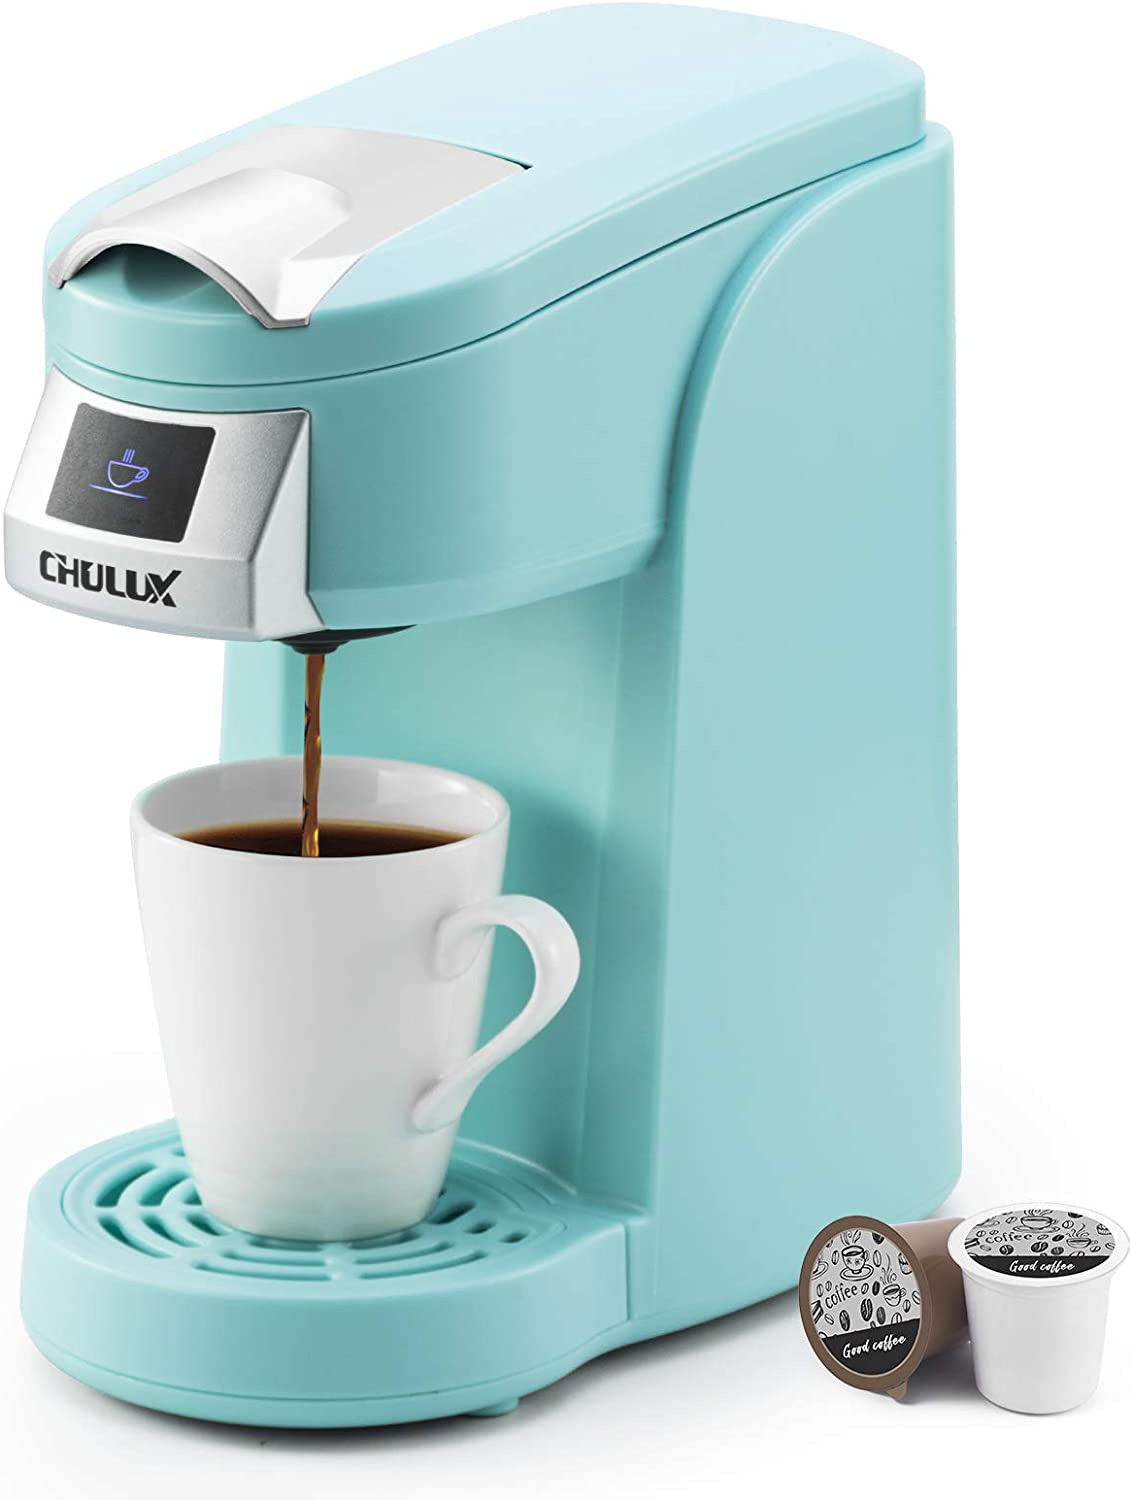 CHULUX Upgrade Single Serve Coffee Maker, 12oz Fast Brewing Machine Brewer Compatible With Pods & Reusable Filter, Auto Shut-Off, One Button Operation, for Hotel, Office, or Travel